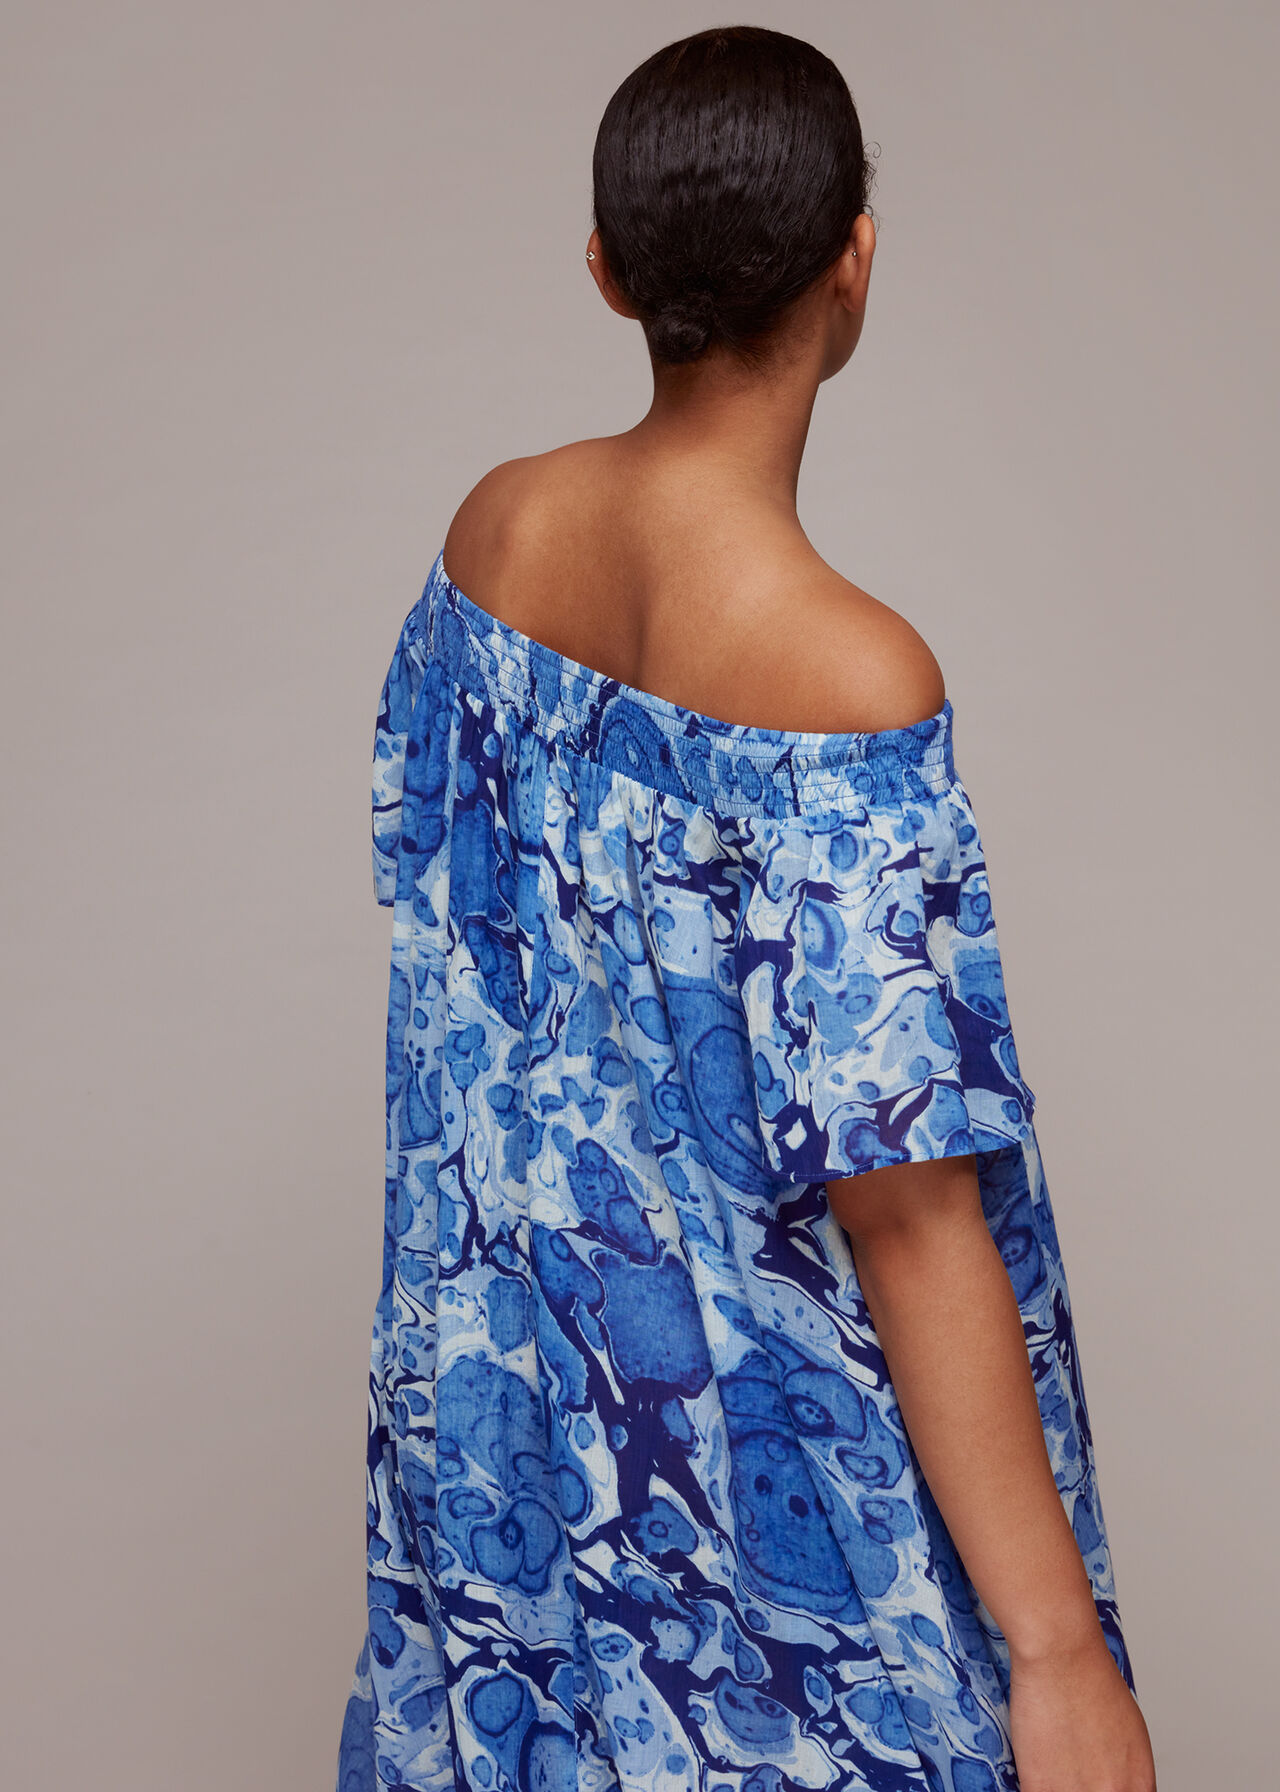 Marble Beach Cover Up Dress